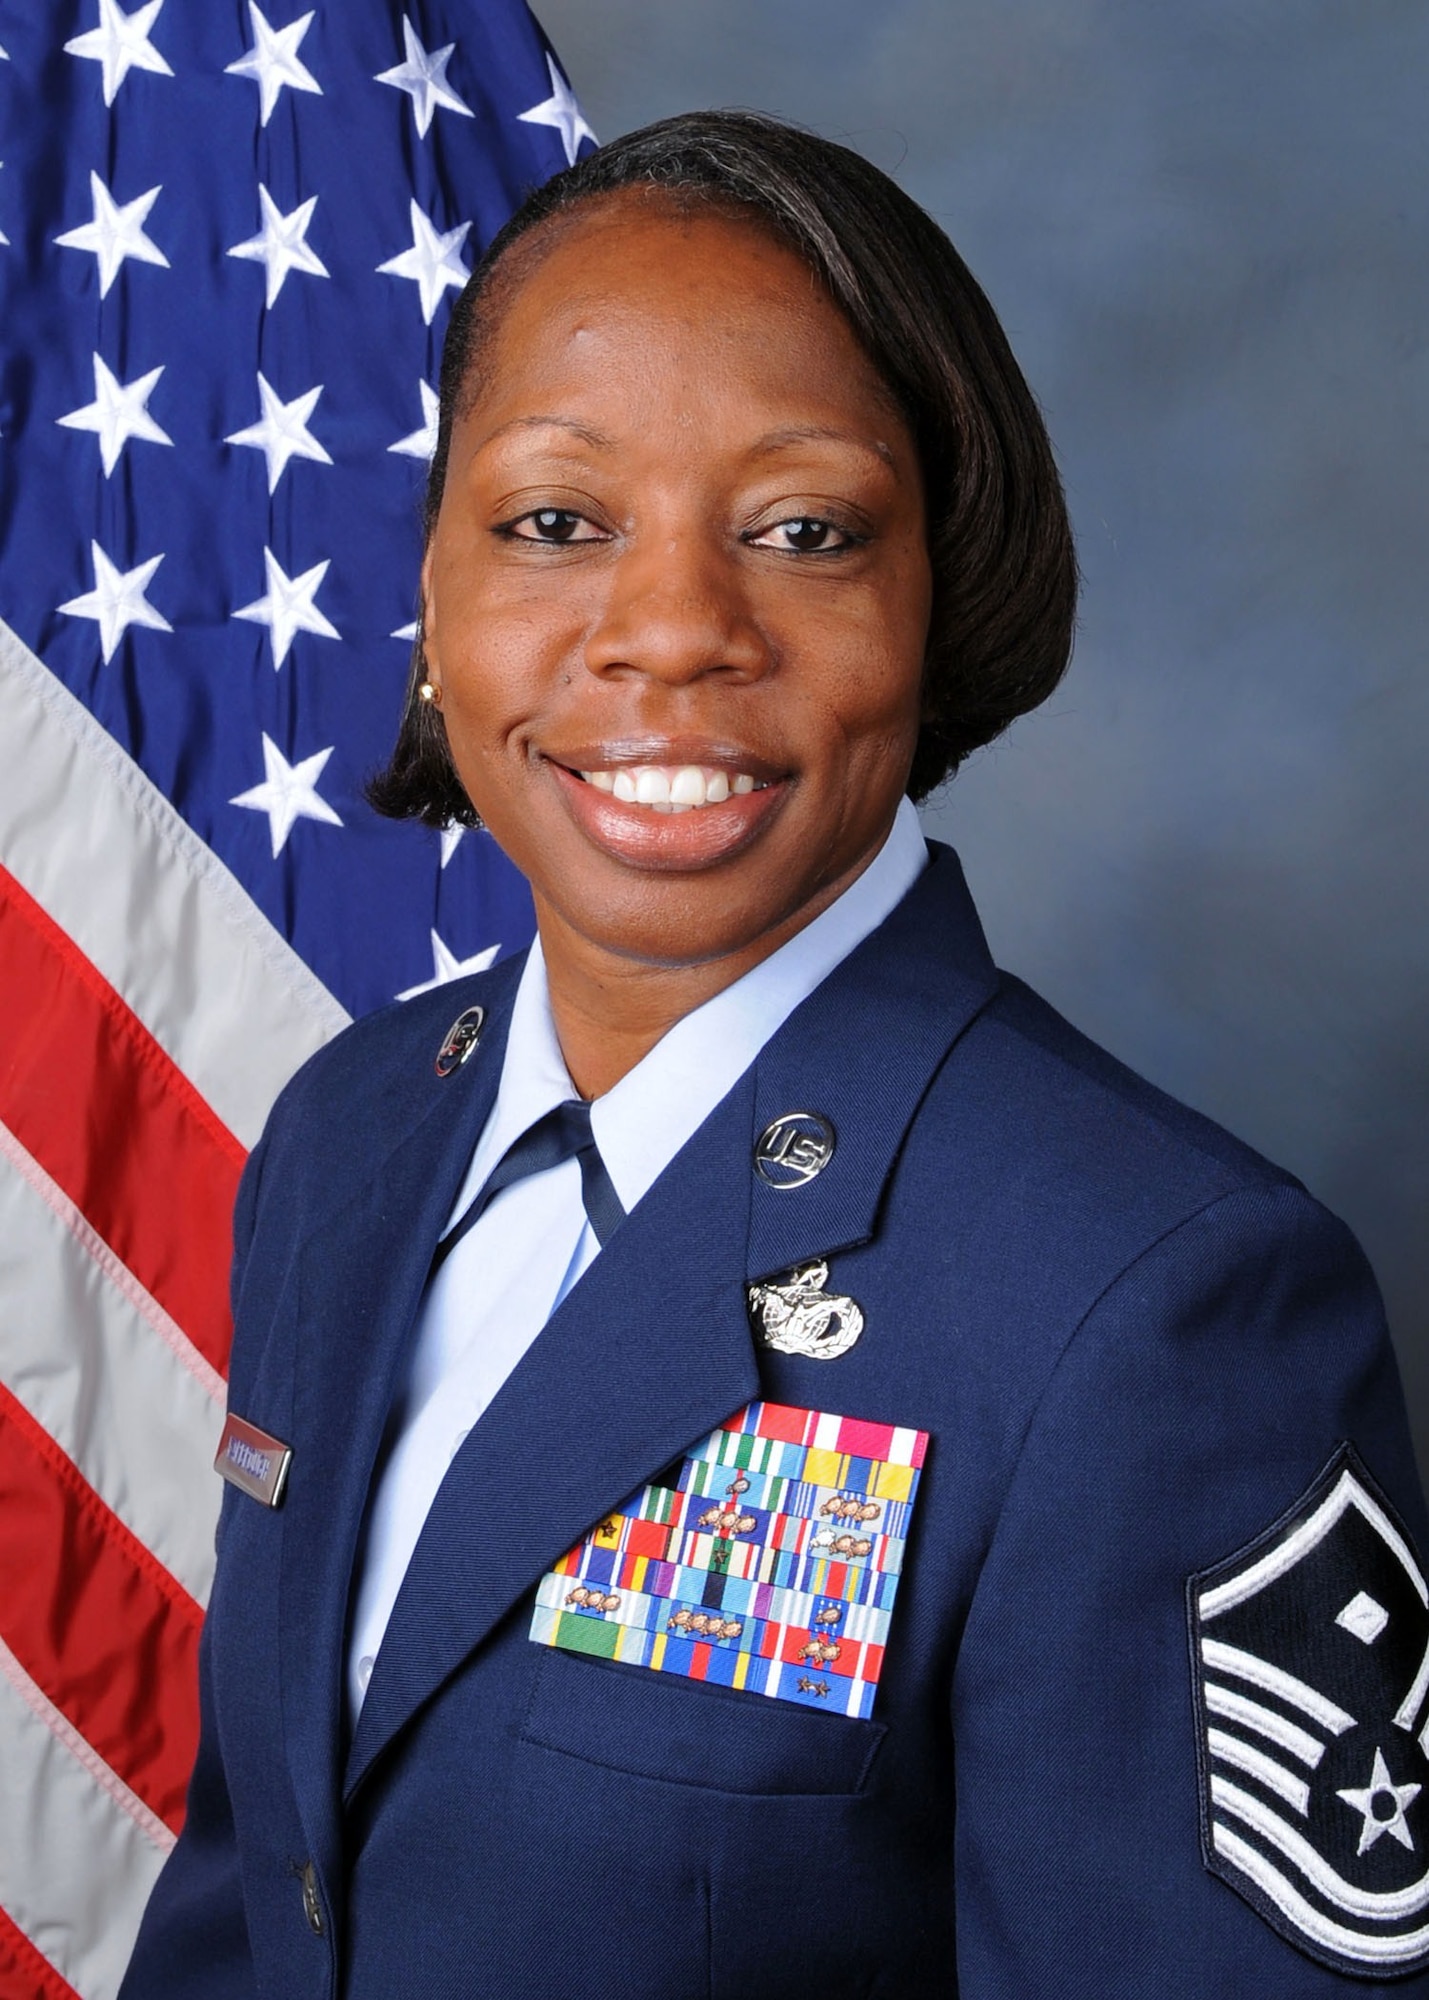 Master Sgt. Keisha Yarbrough, first sergeant to the 2d Medical Group at Barksdale Air Force Base, La., was recognized as First Sergeant of the Year.